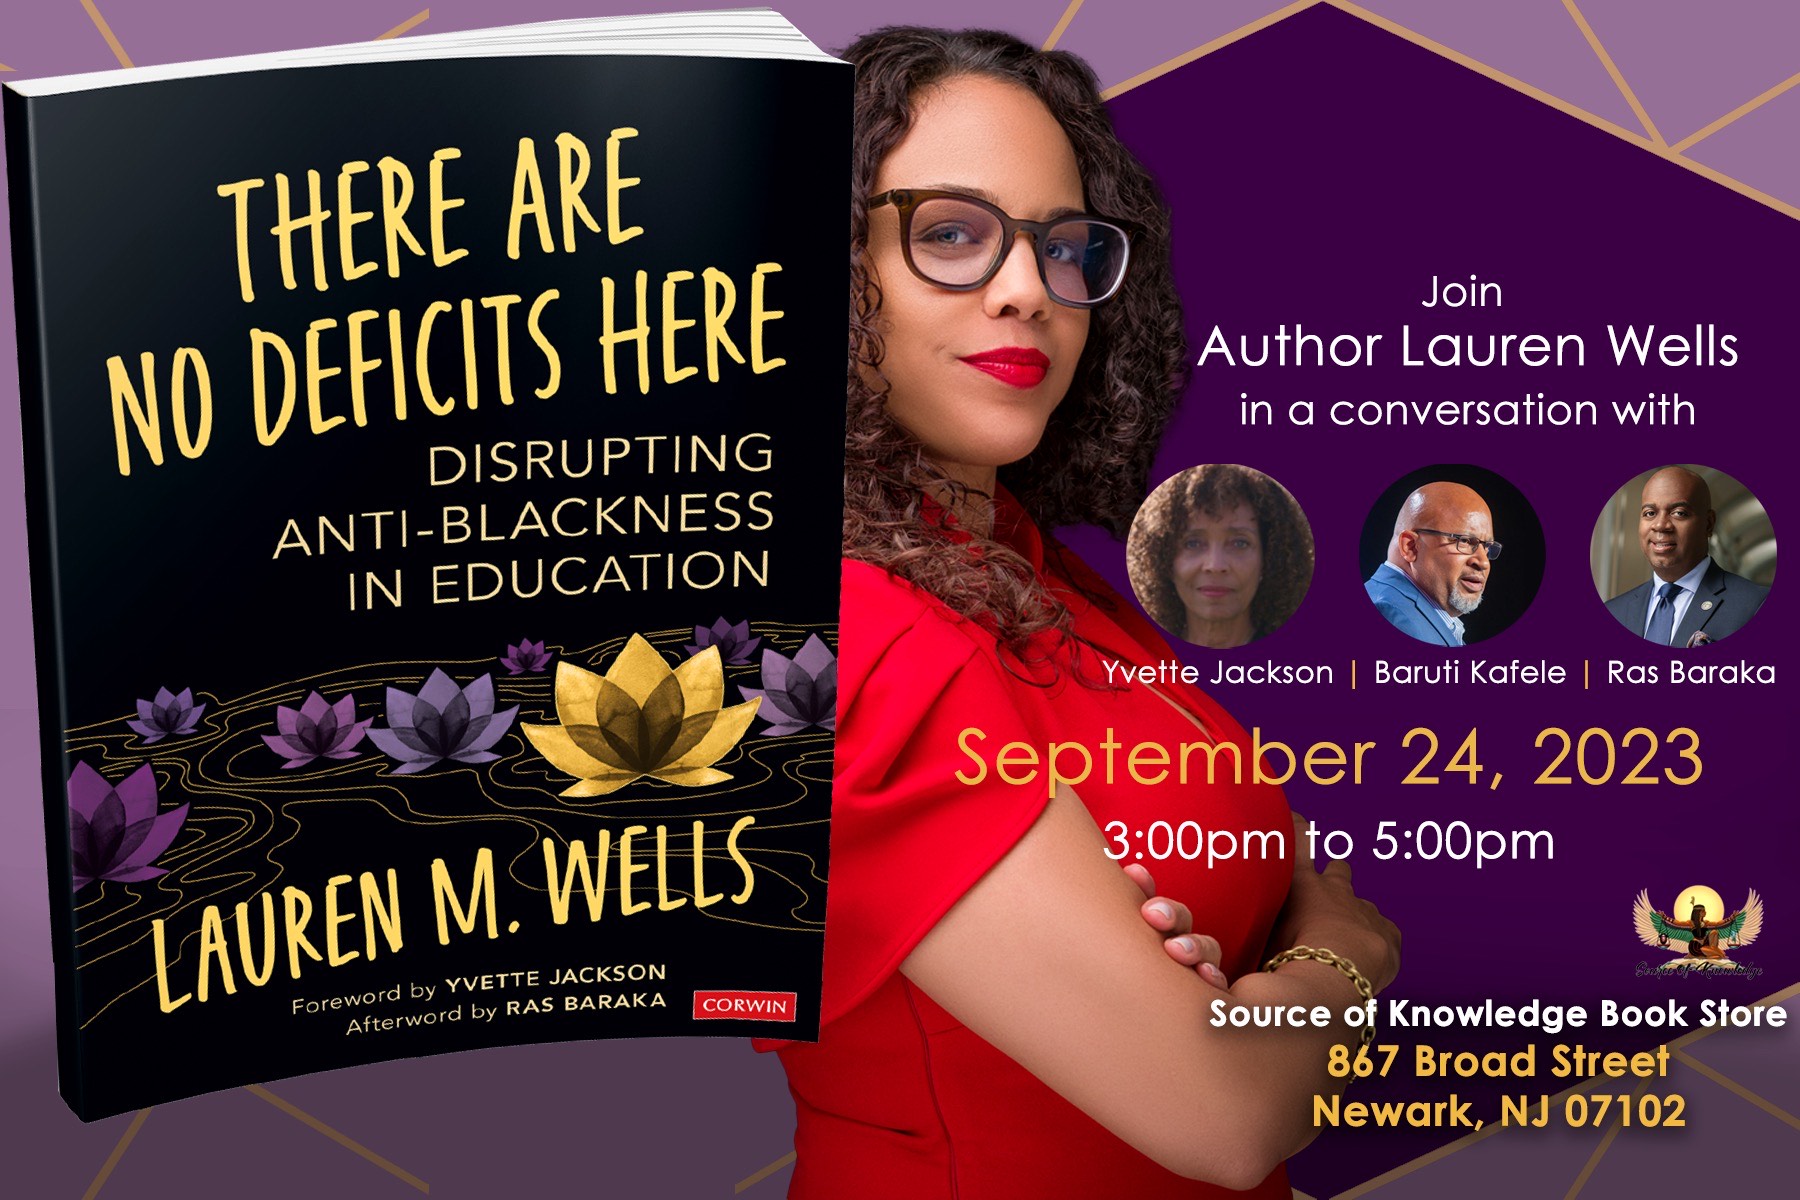 There Are No Deficits Here: Book Discussion and Signing